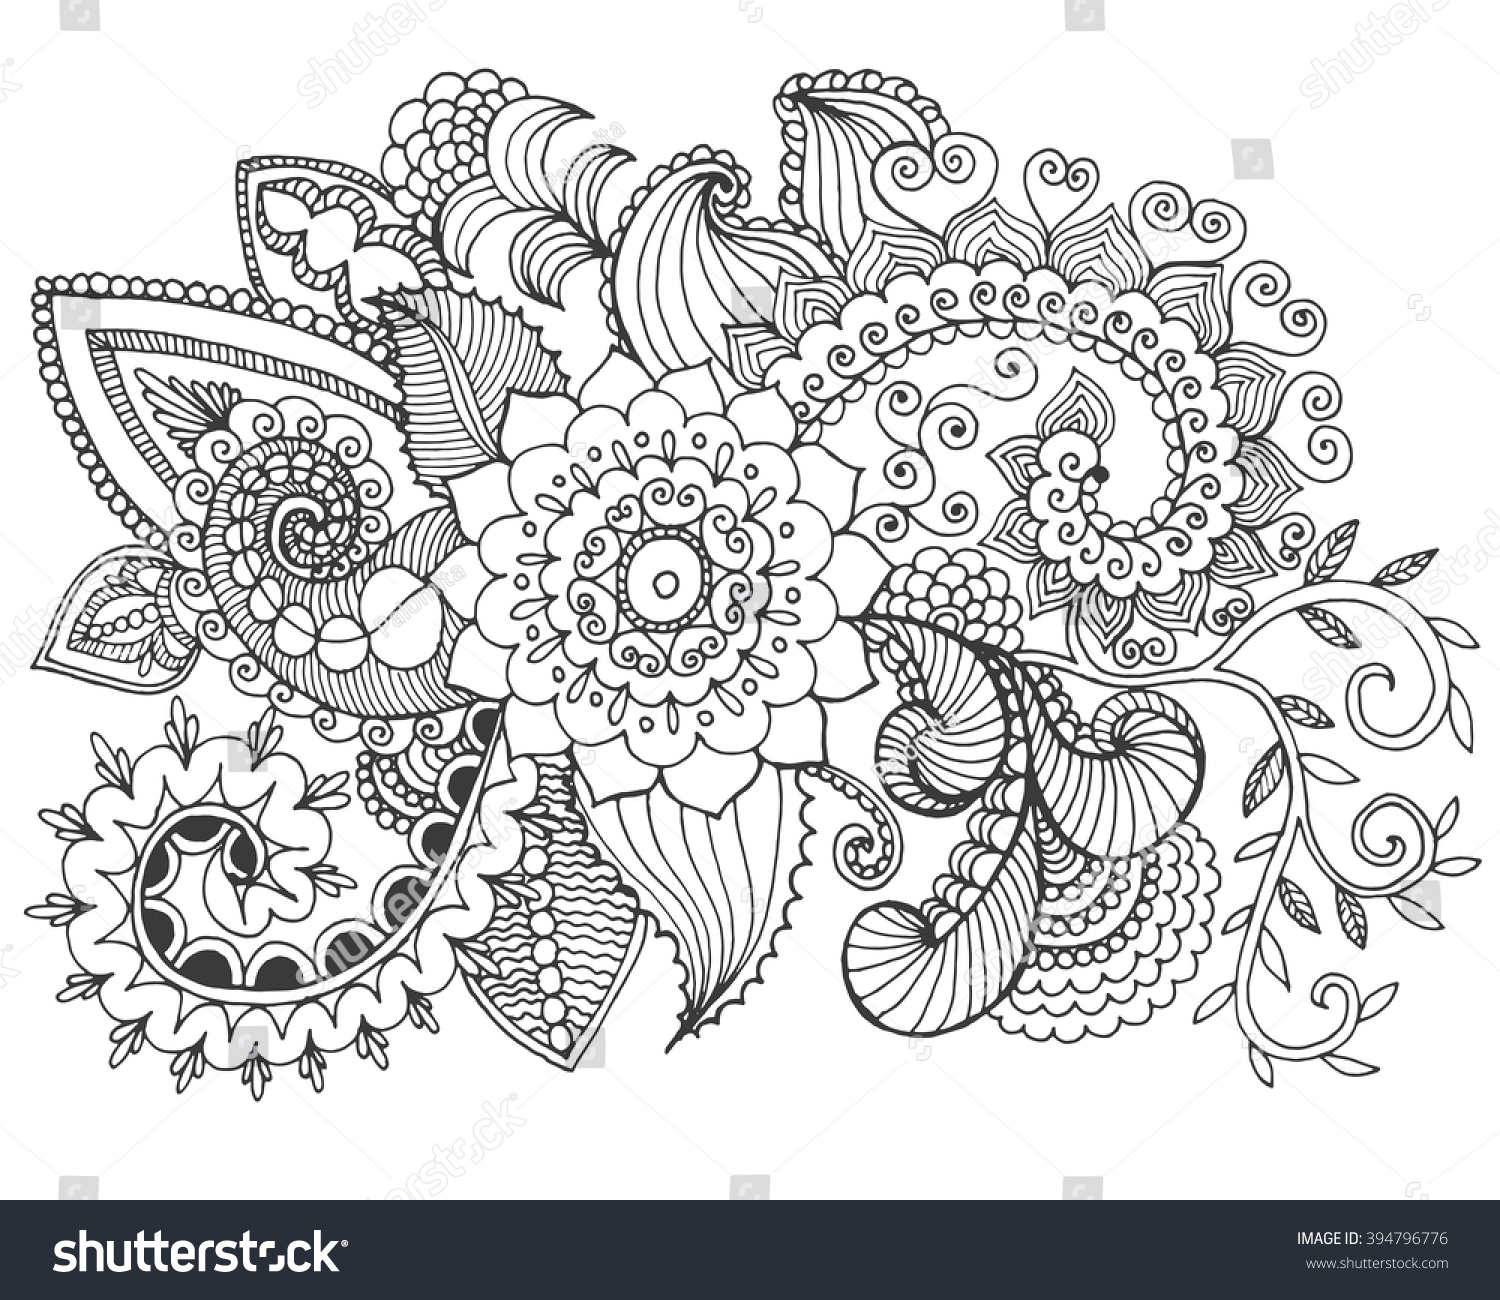 Fantasy Flowers Coloring Page Hand Drawn Stock Vector Royalty ...